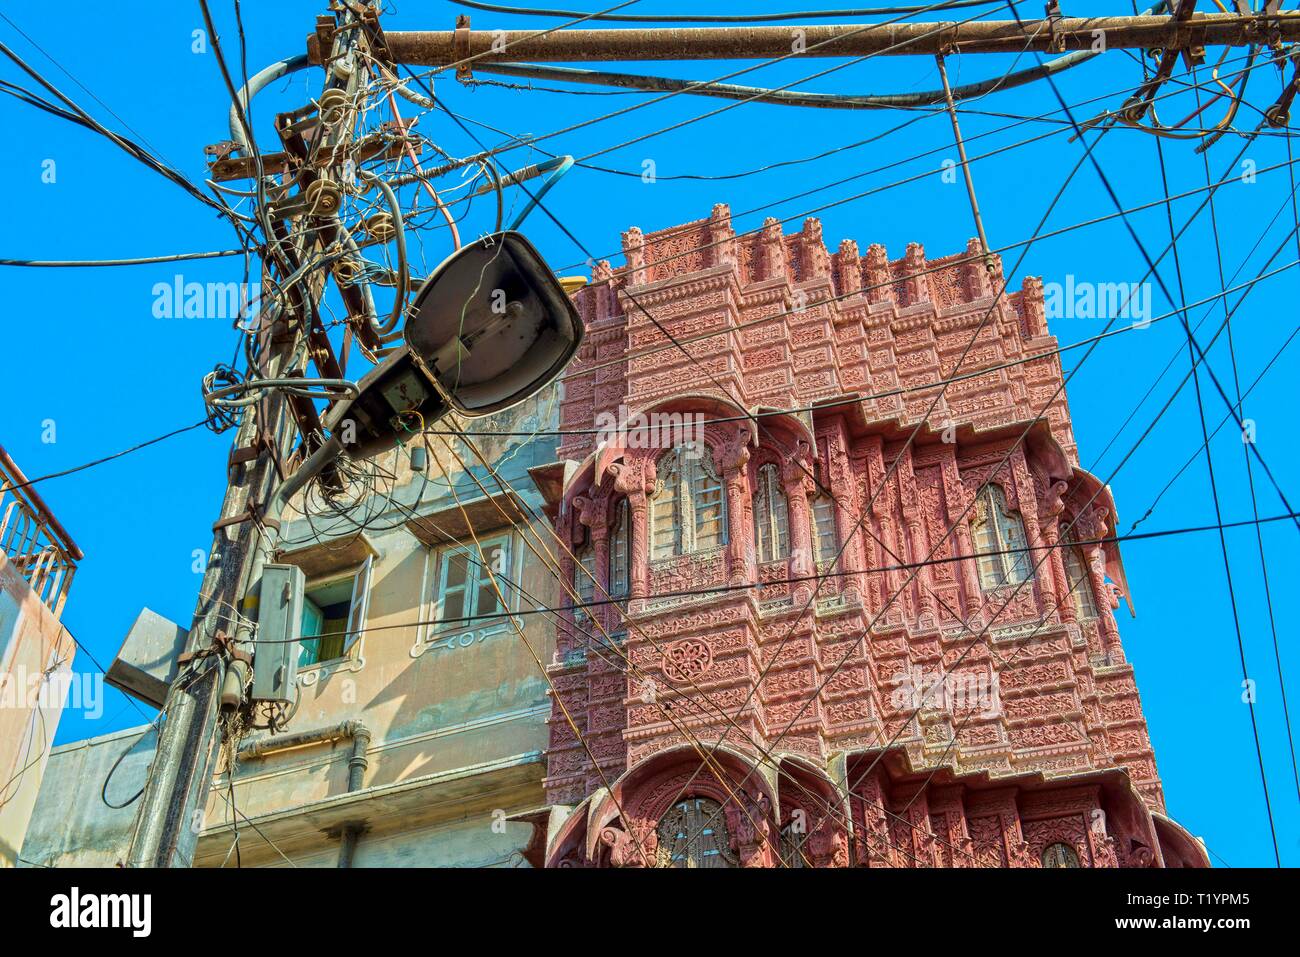 INDIA, RAJASTHAN, BIKANER Tangle of power lines contrasting with a well kept historical building in the old part of Bikaner Stock Photo